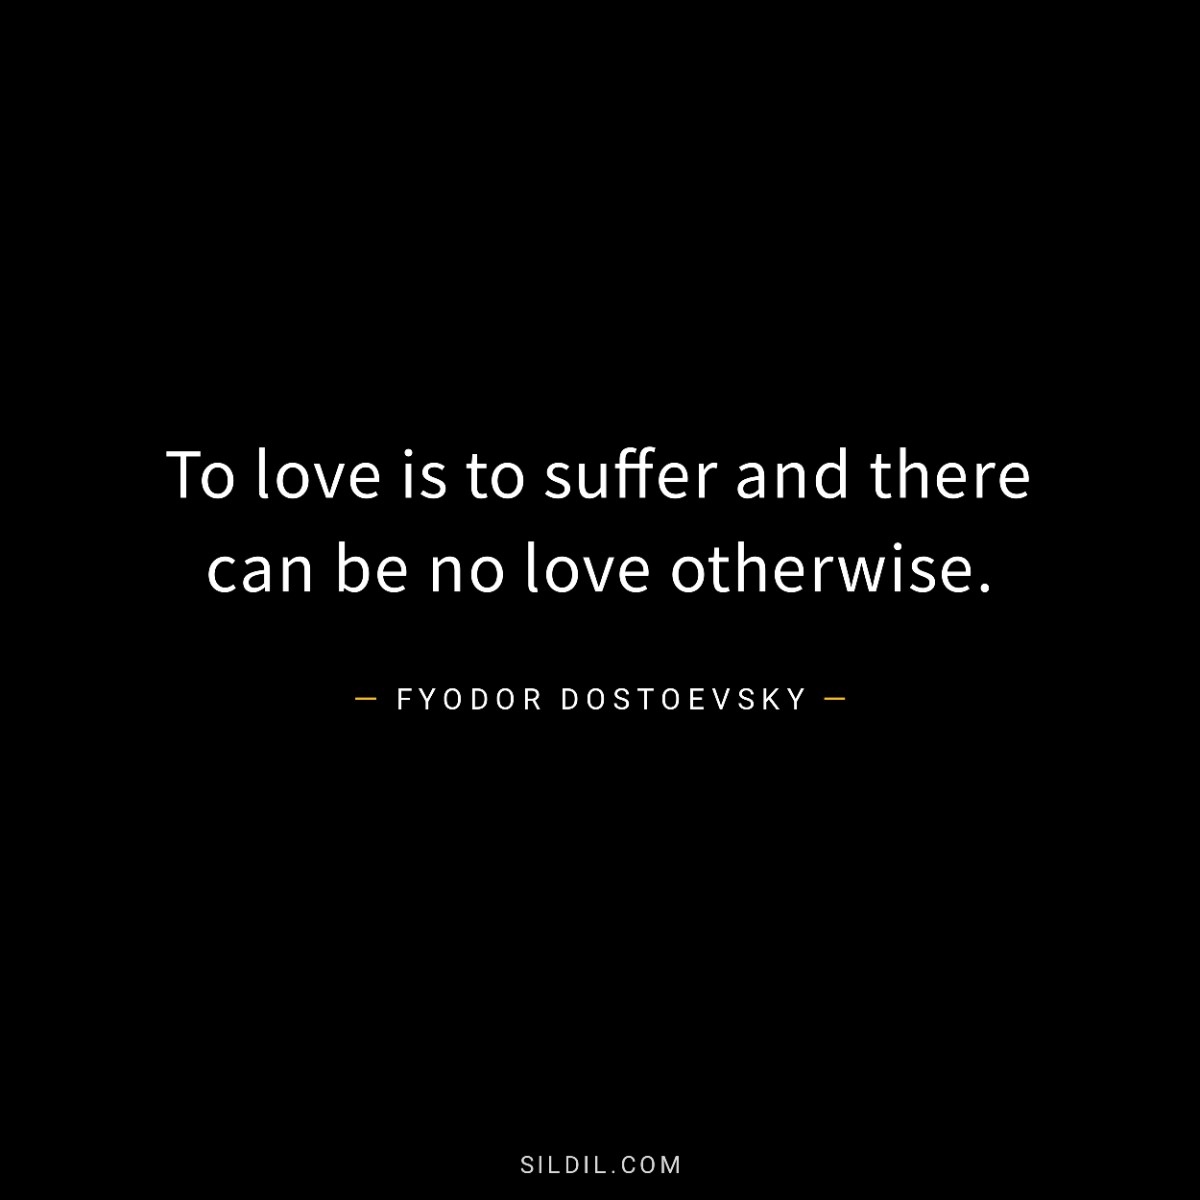 To love is to suffer and there can be no love otherwise.